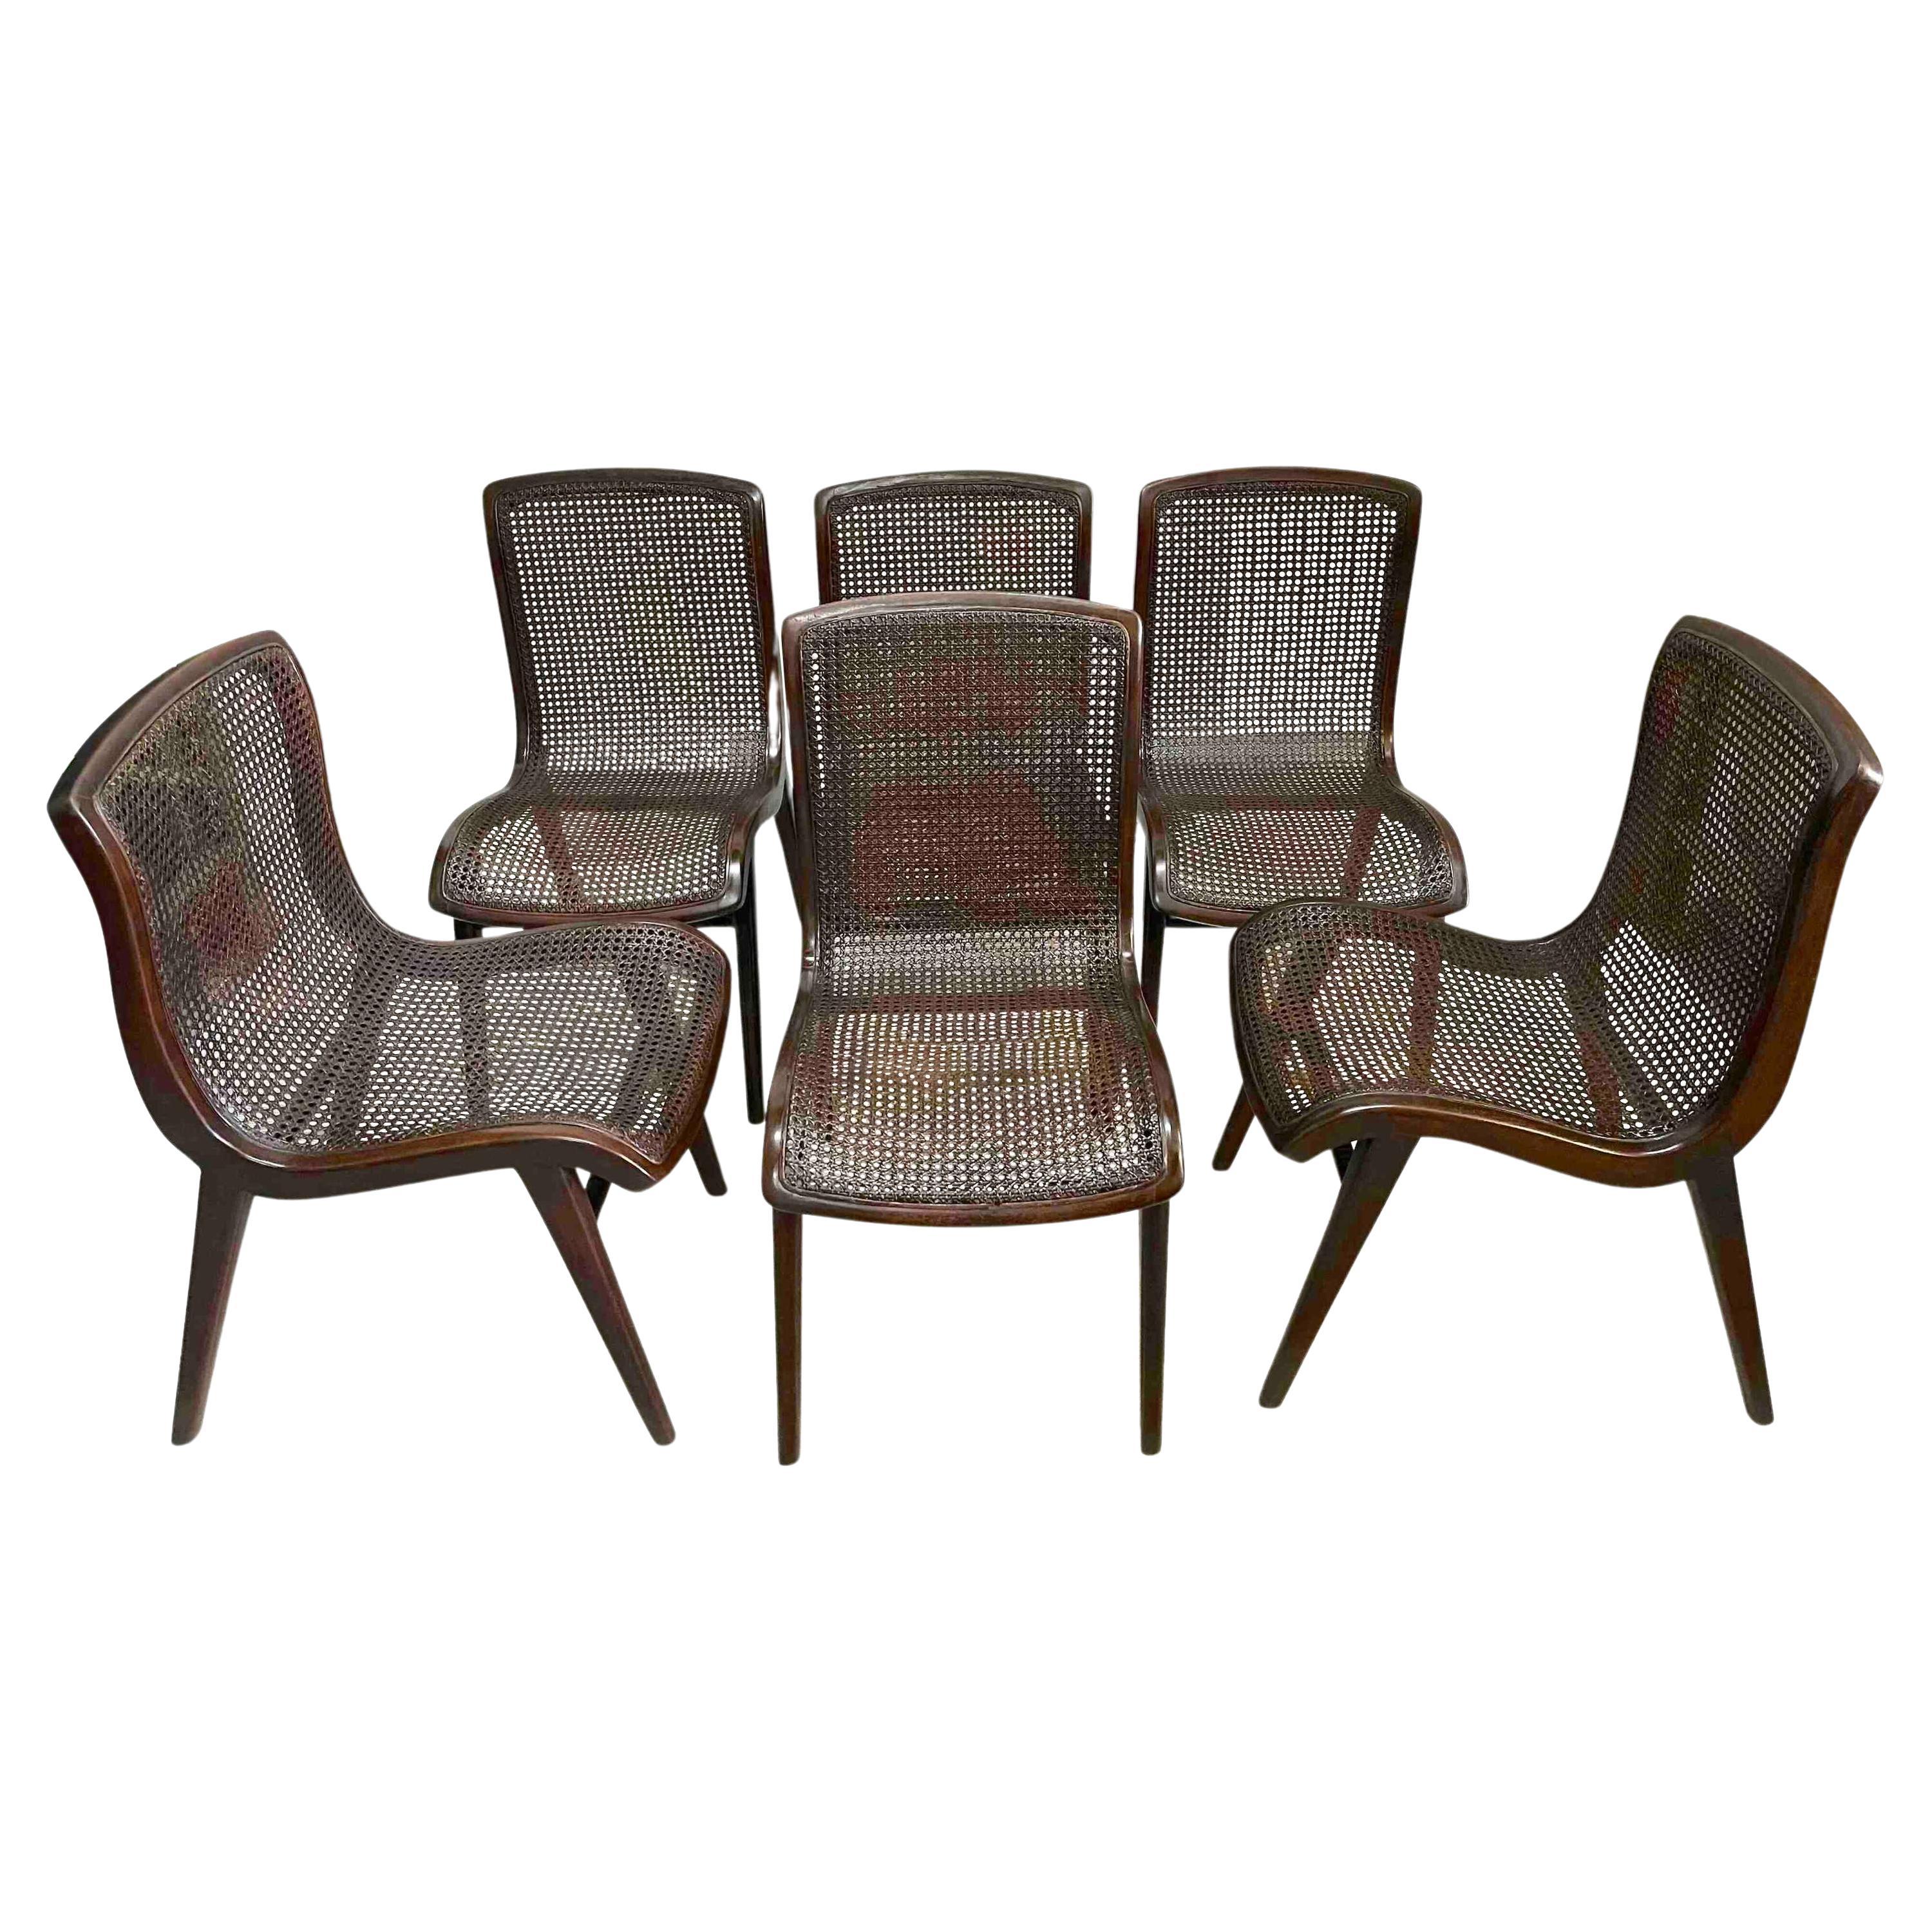 Set Six Sleek French Modern Cantilever Woven Cane Dining Chairs For Sale